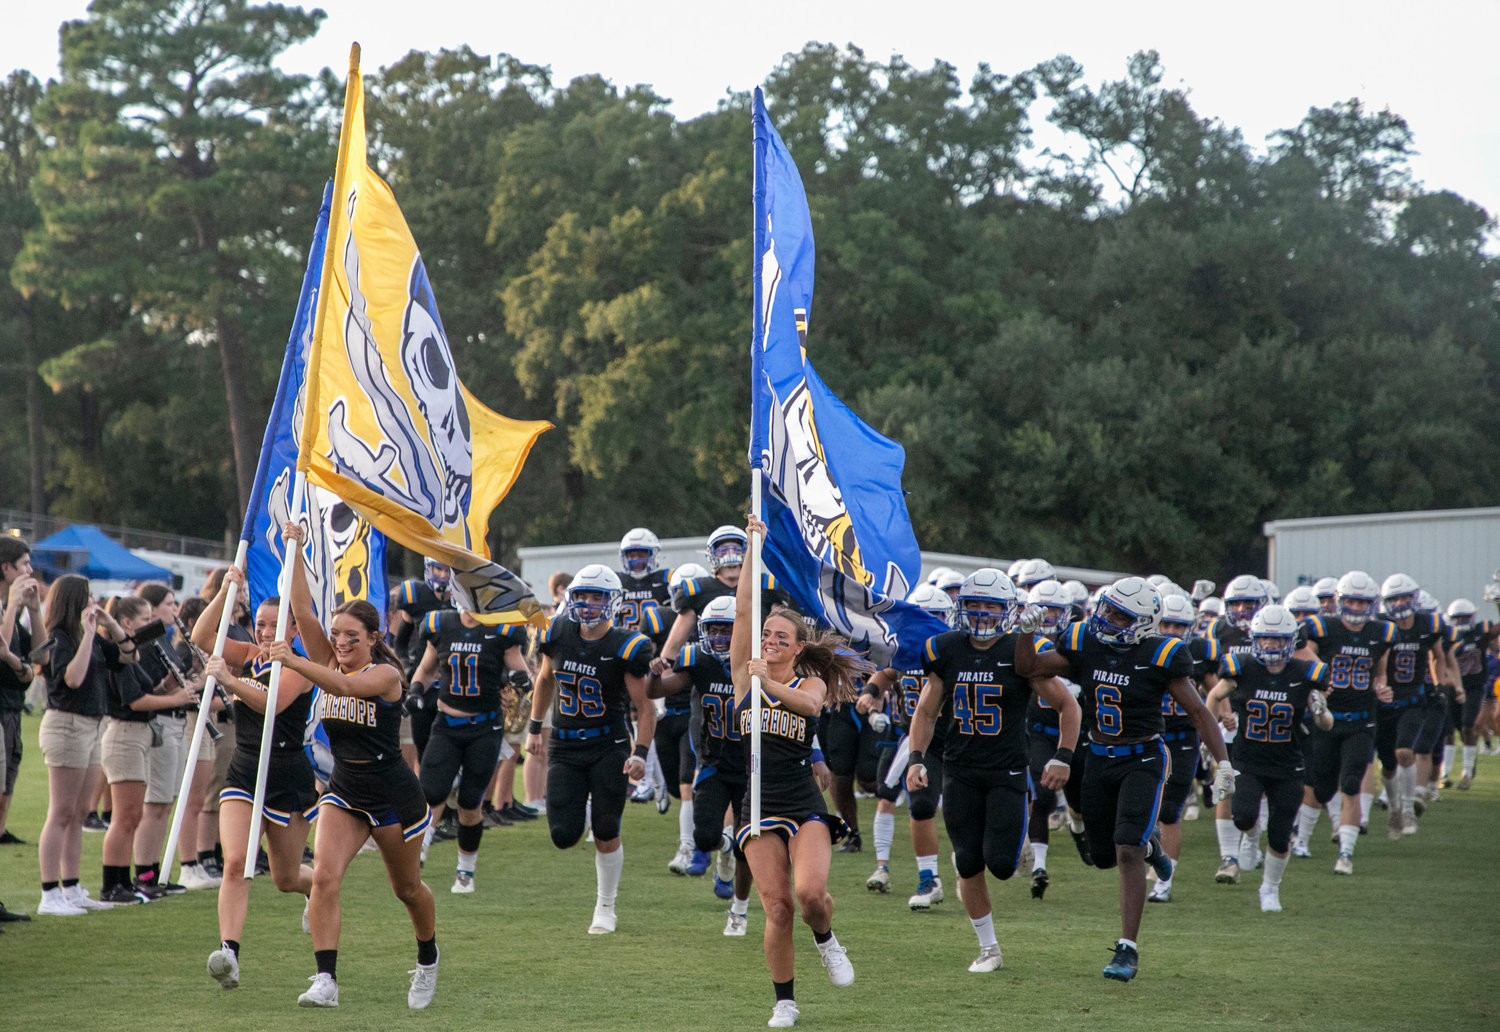 The Fairhope Pirates take the field for their season-opening game against the Spanish Fort Toros Aug. 19. Fairhope's Week 4 Friday game at MGM was moved to Thursday, Sept. 8, ahead of forecasted storms.